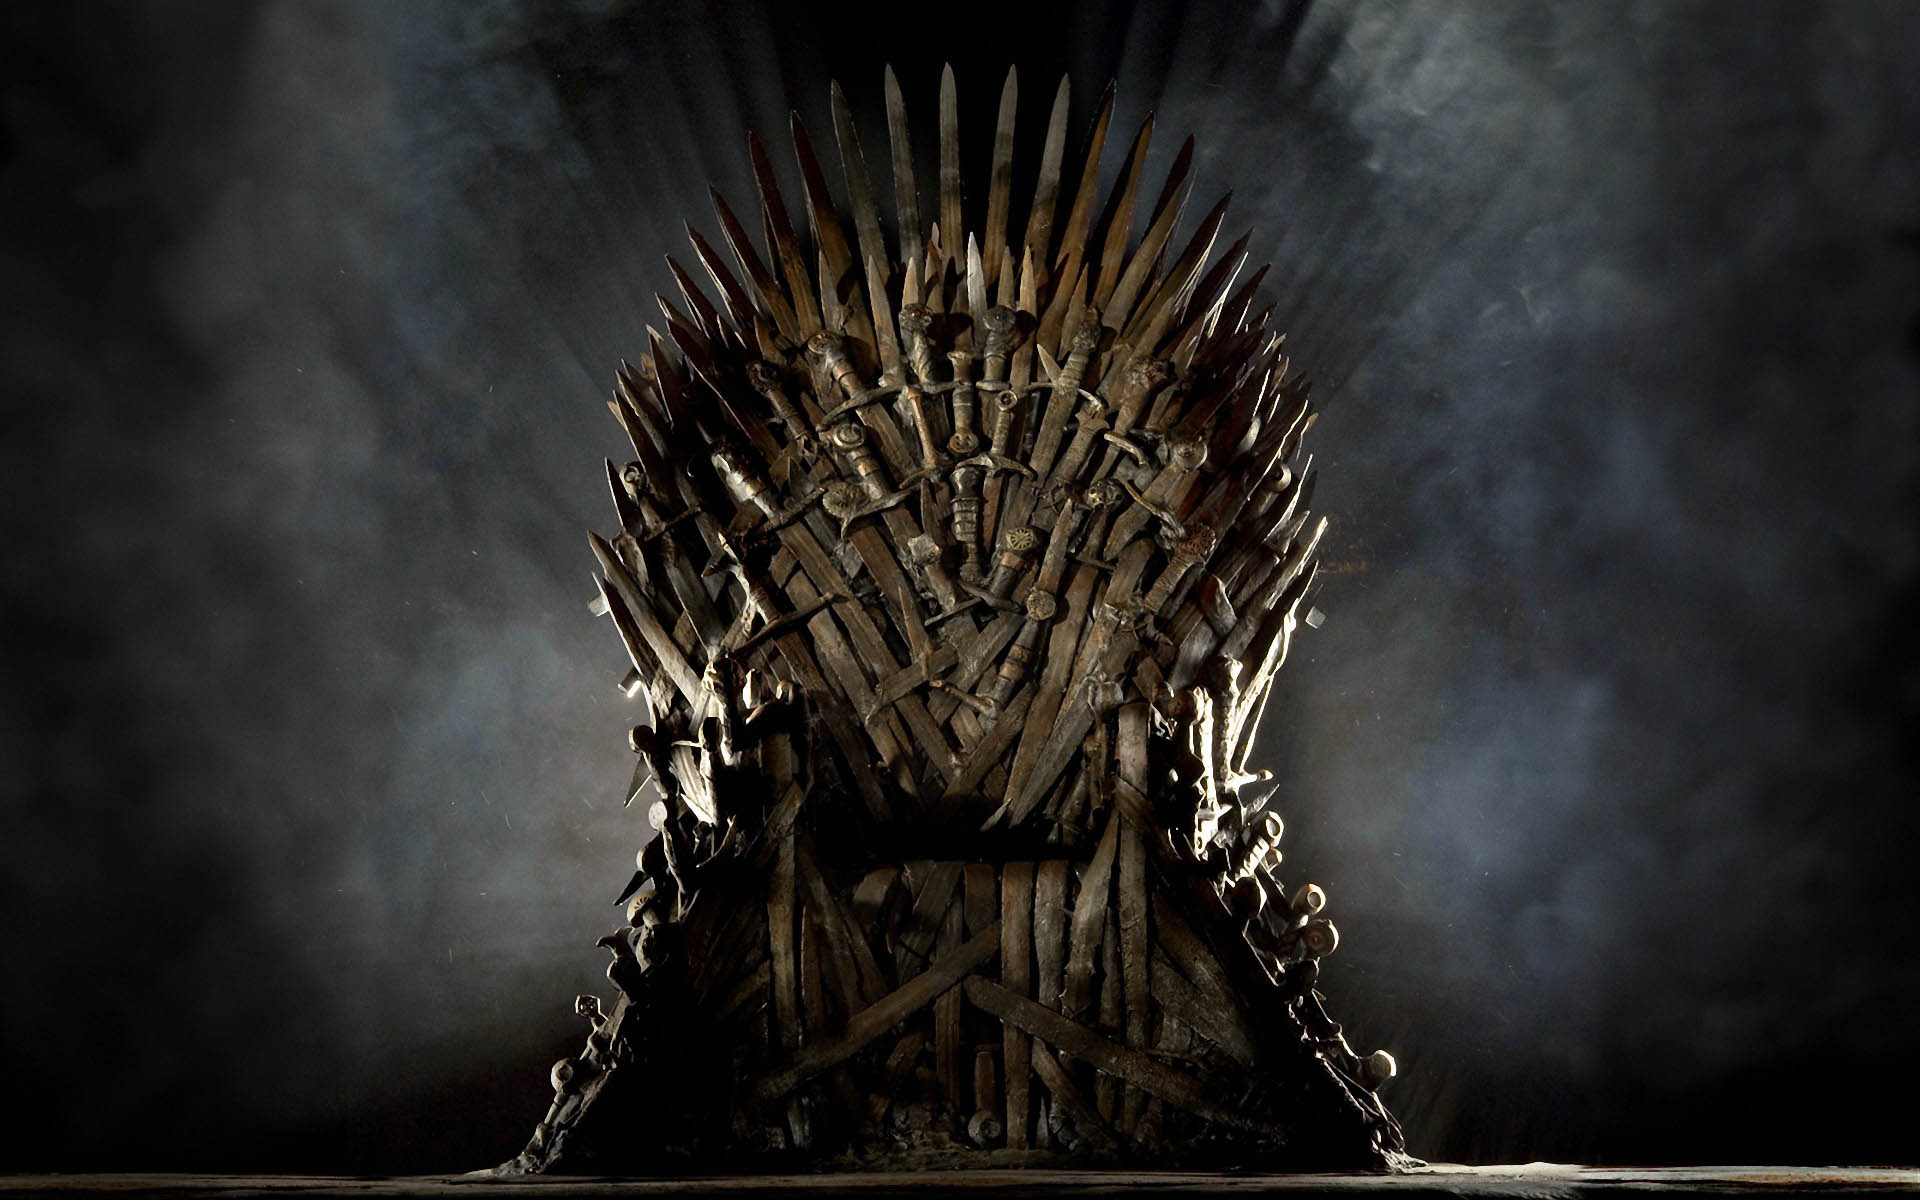 game-of-thrones-poster_85627-1920x12001.jpg